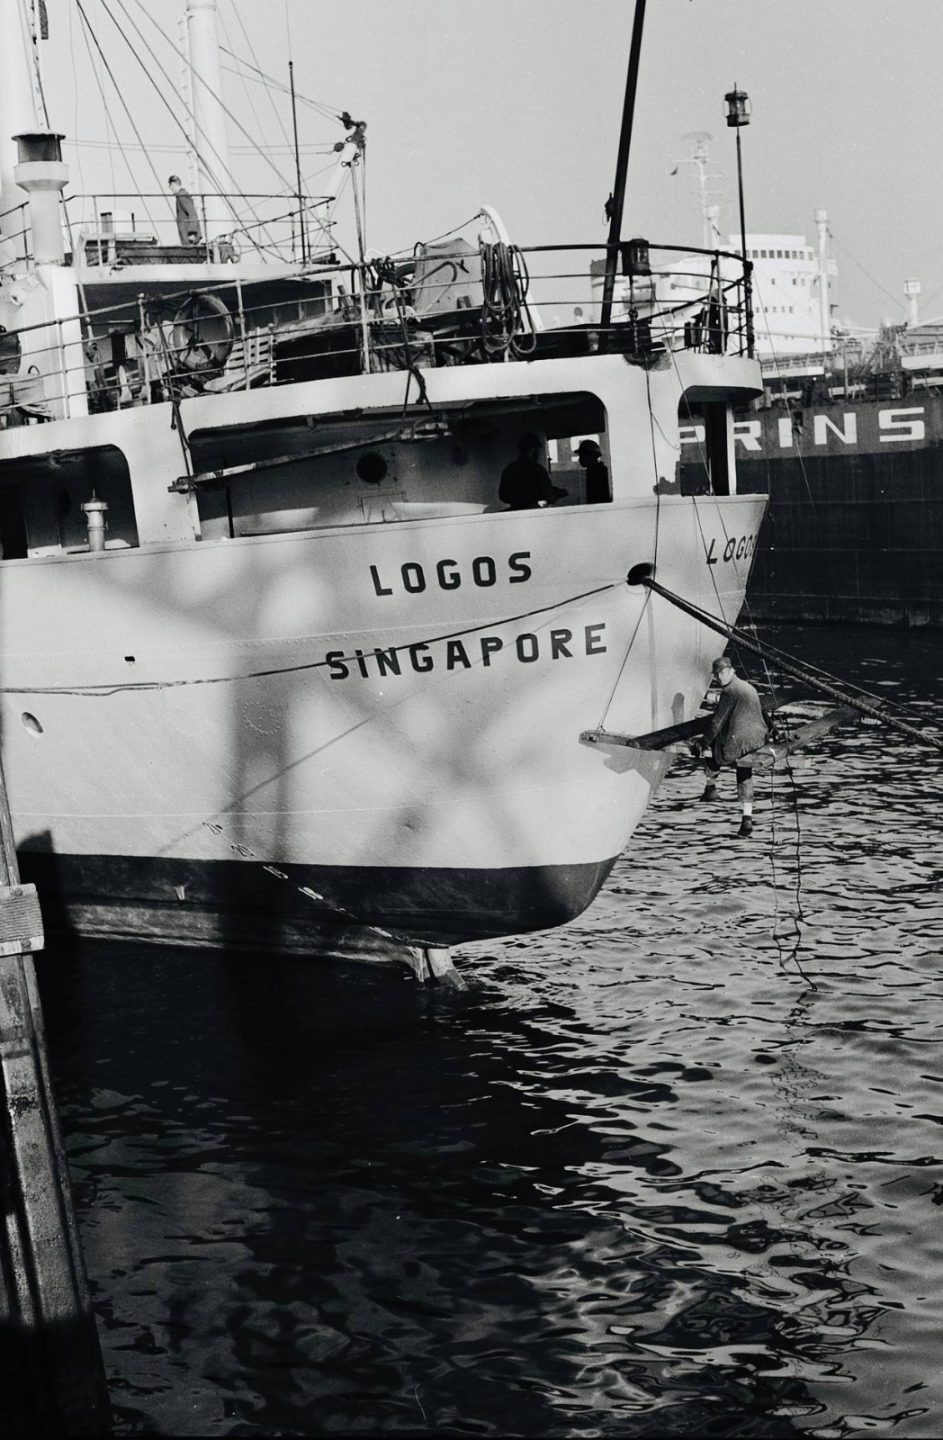 The MV Logos, which was registered in Singapore in 1970, sailed for 17 years, welcoming 6.5 million visitors across 108 countries. Photo courtesy of OM Ships.